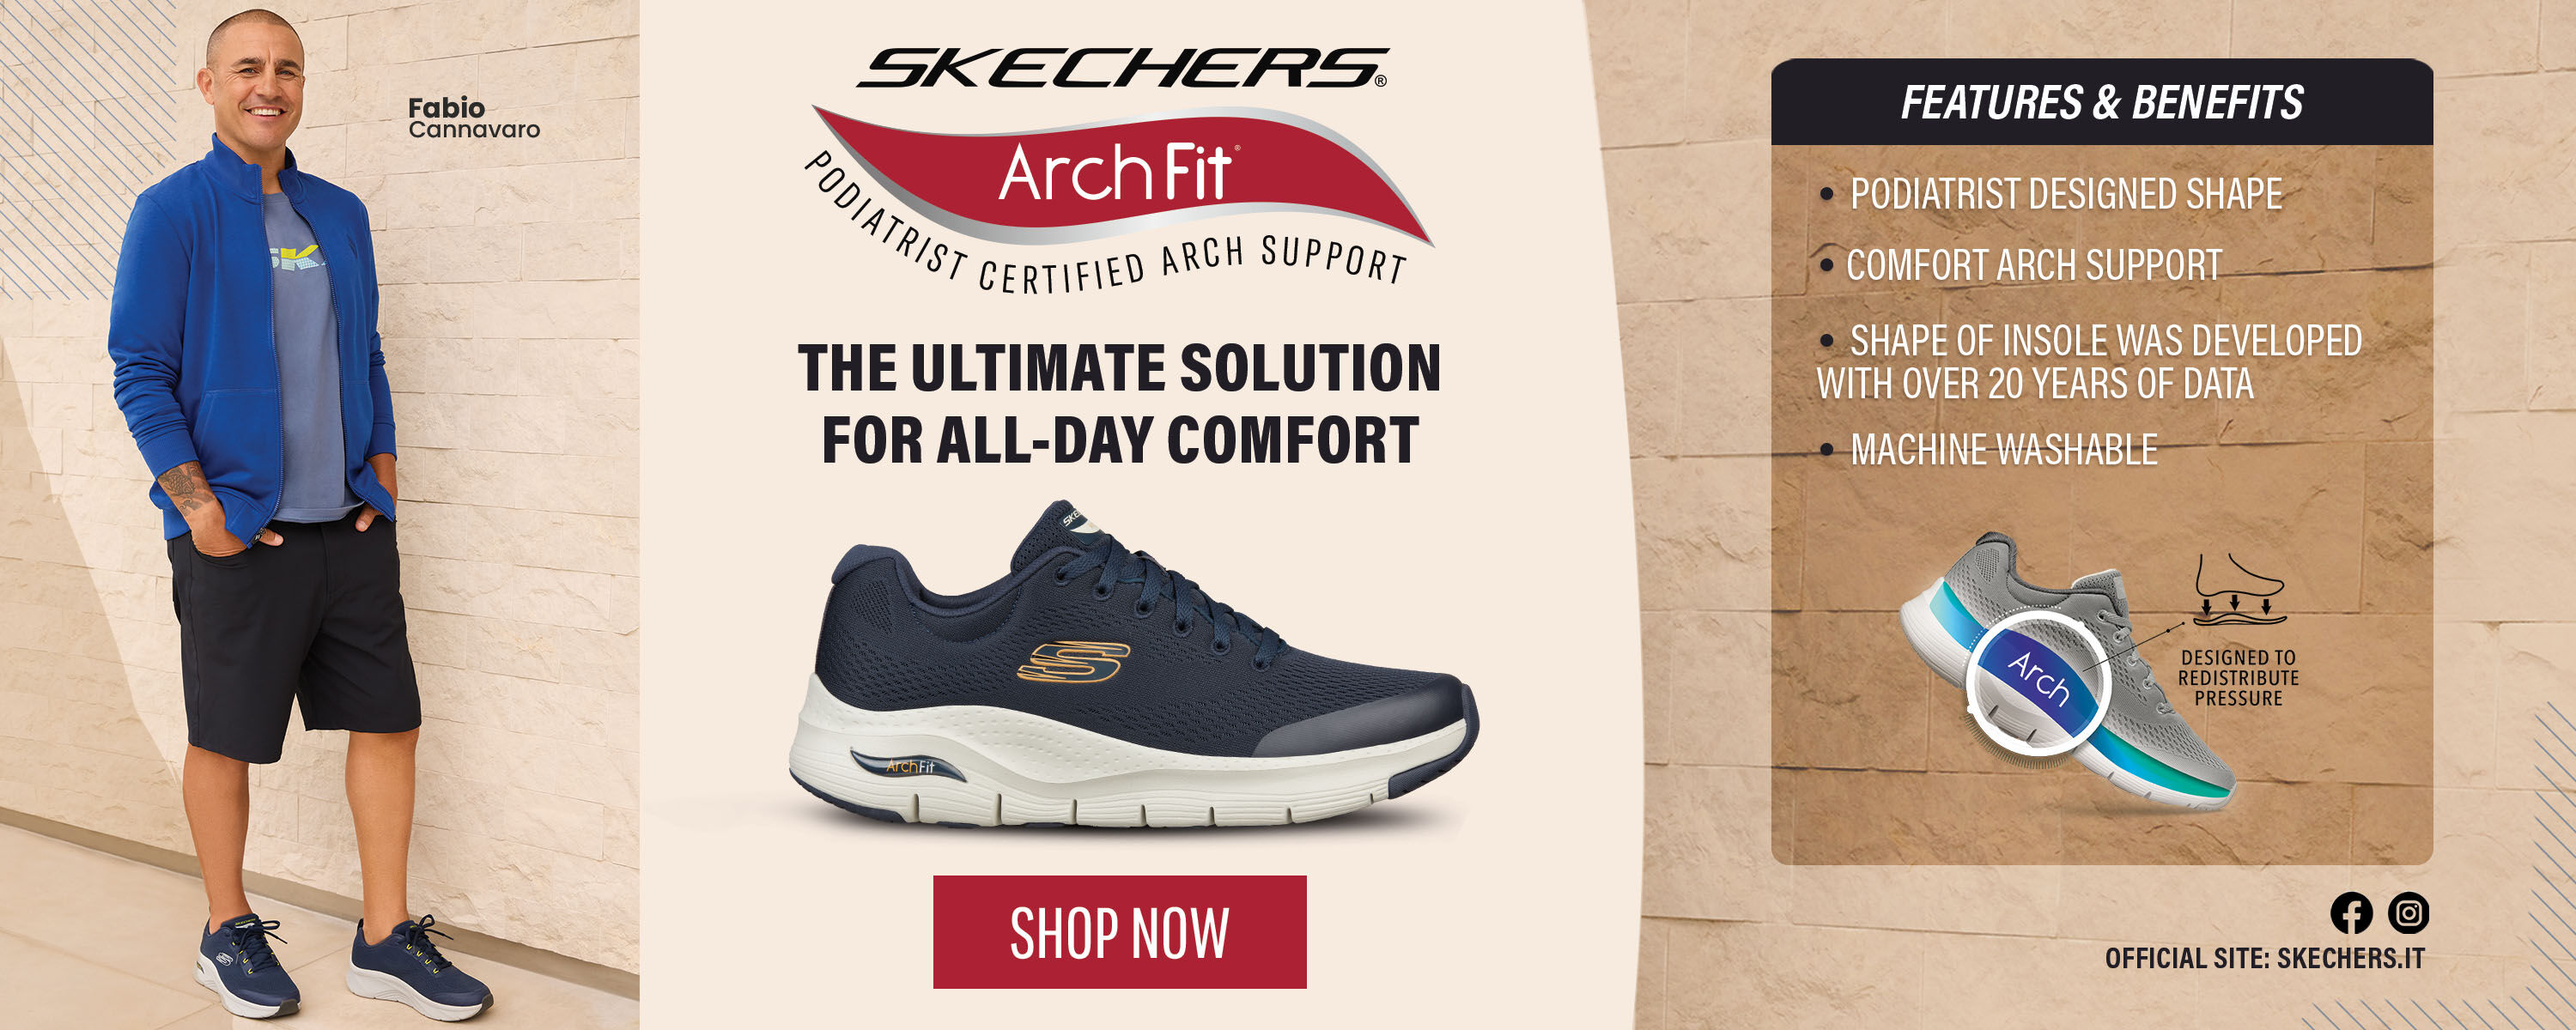 Situation konsol brydning SKECHERS Italy Official Site | The Comfort Technology Company